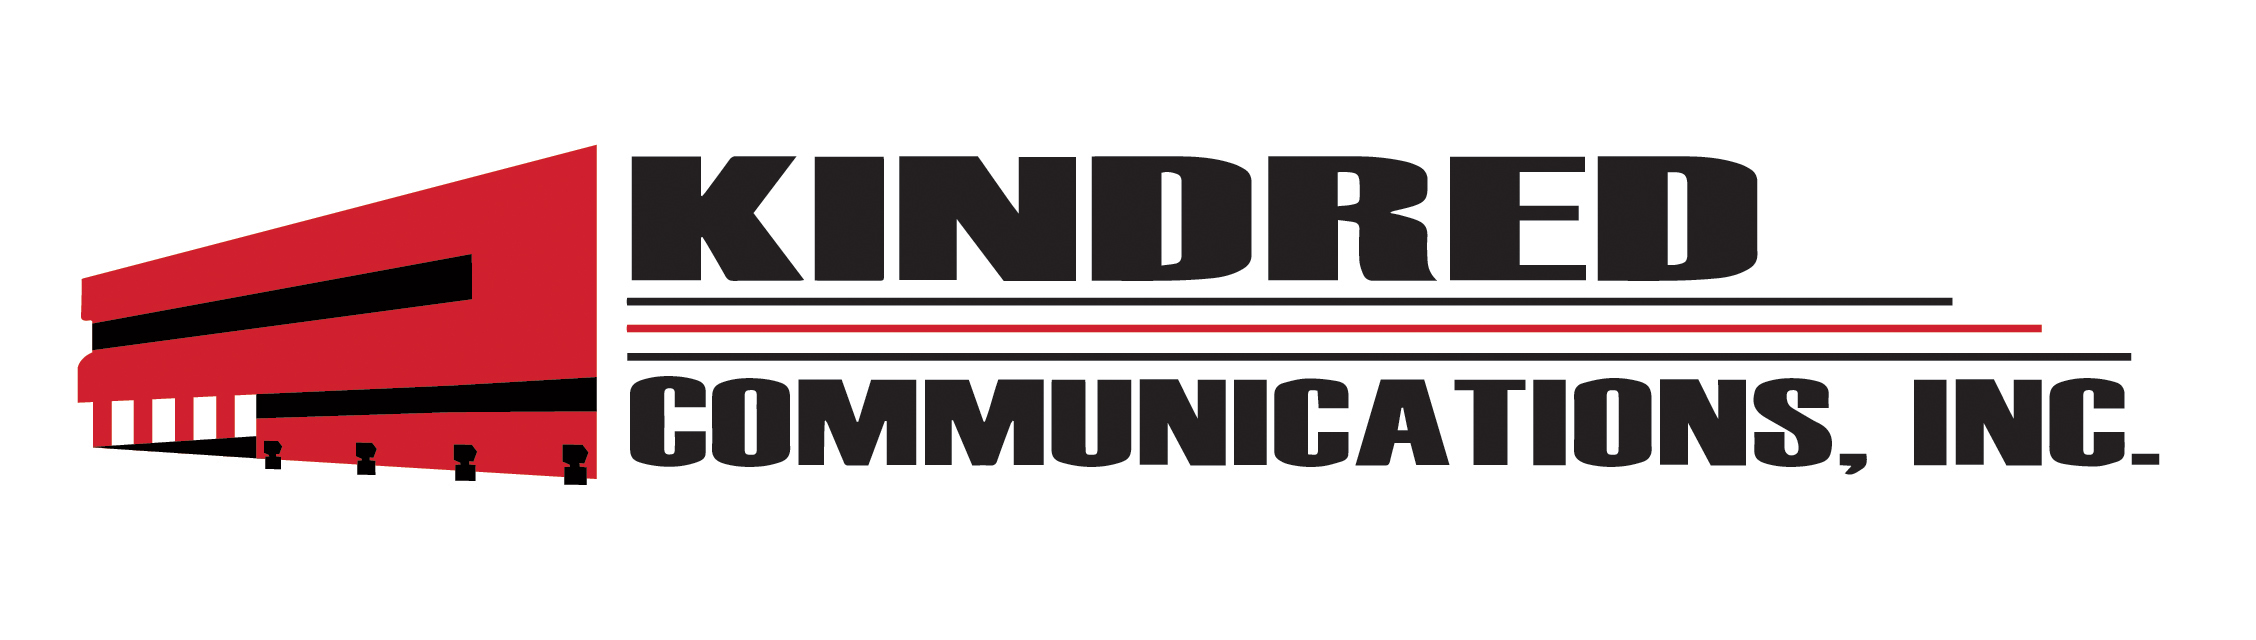 Kindred Communications